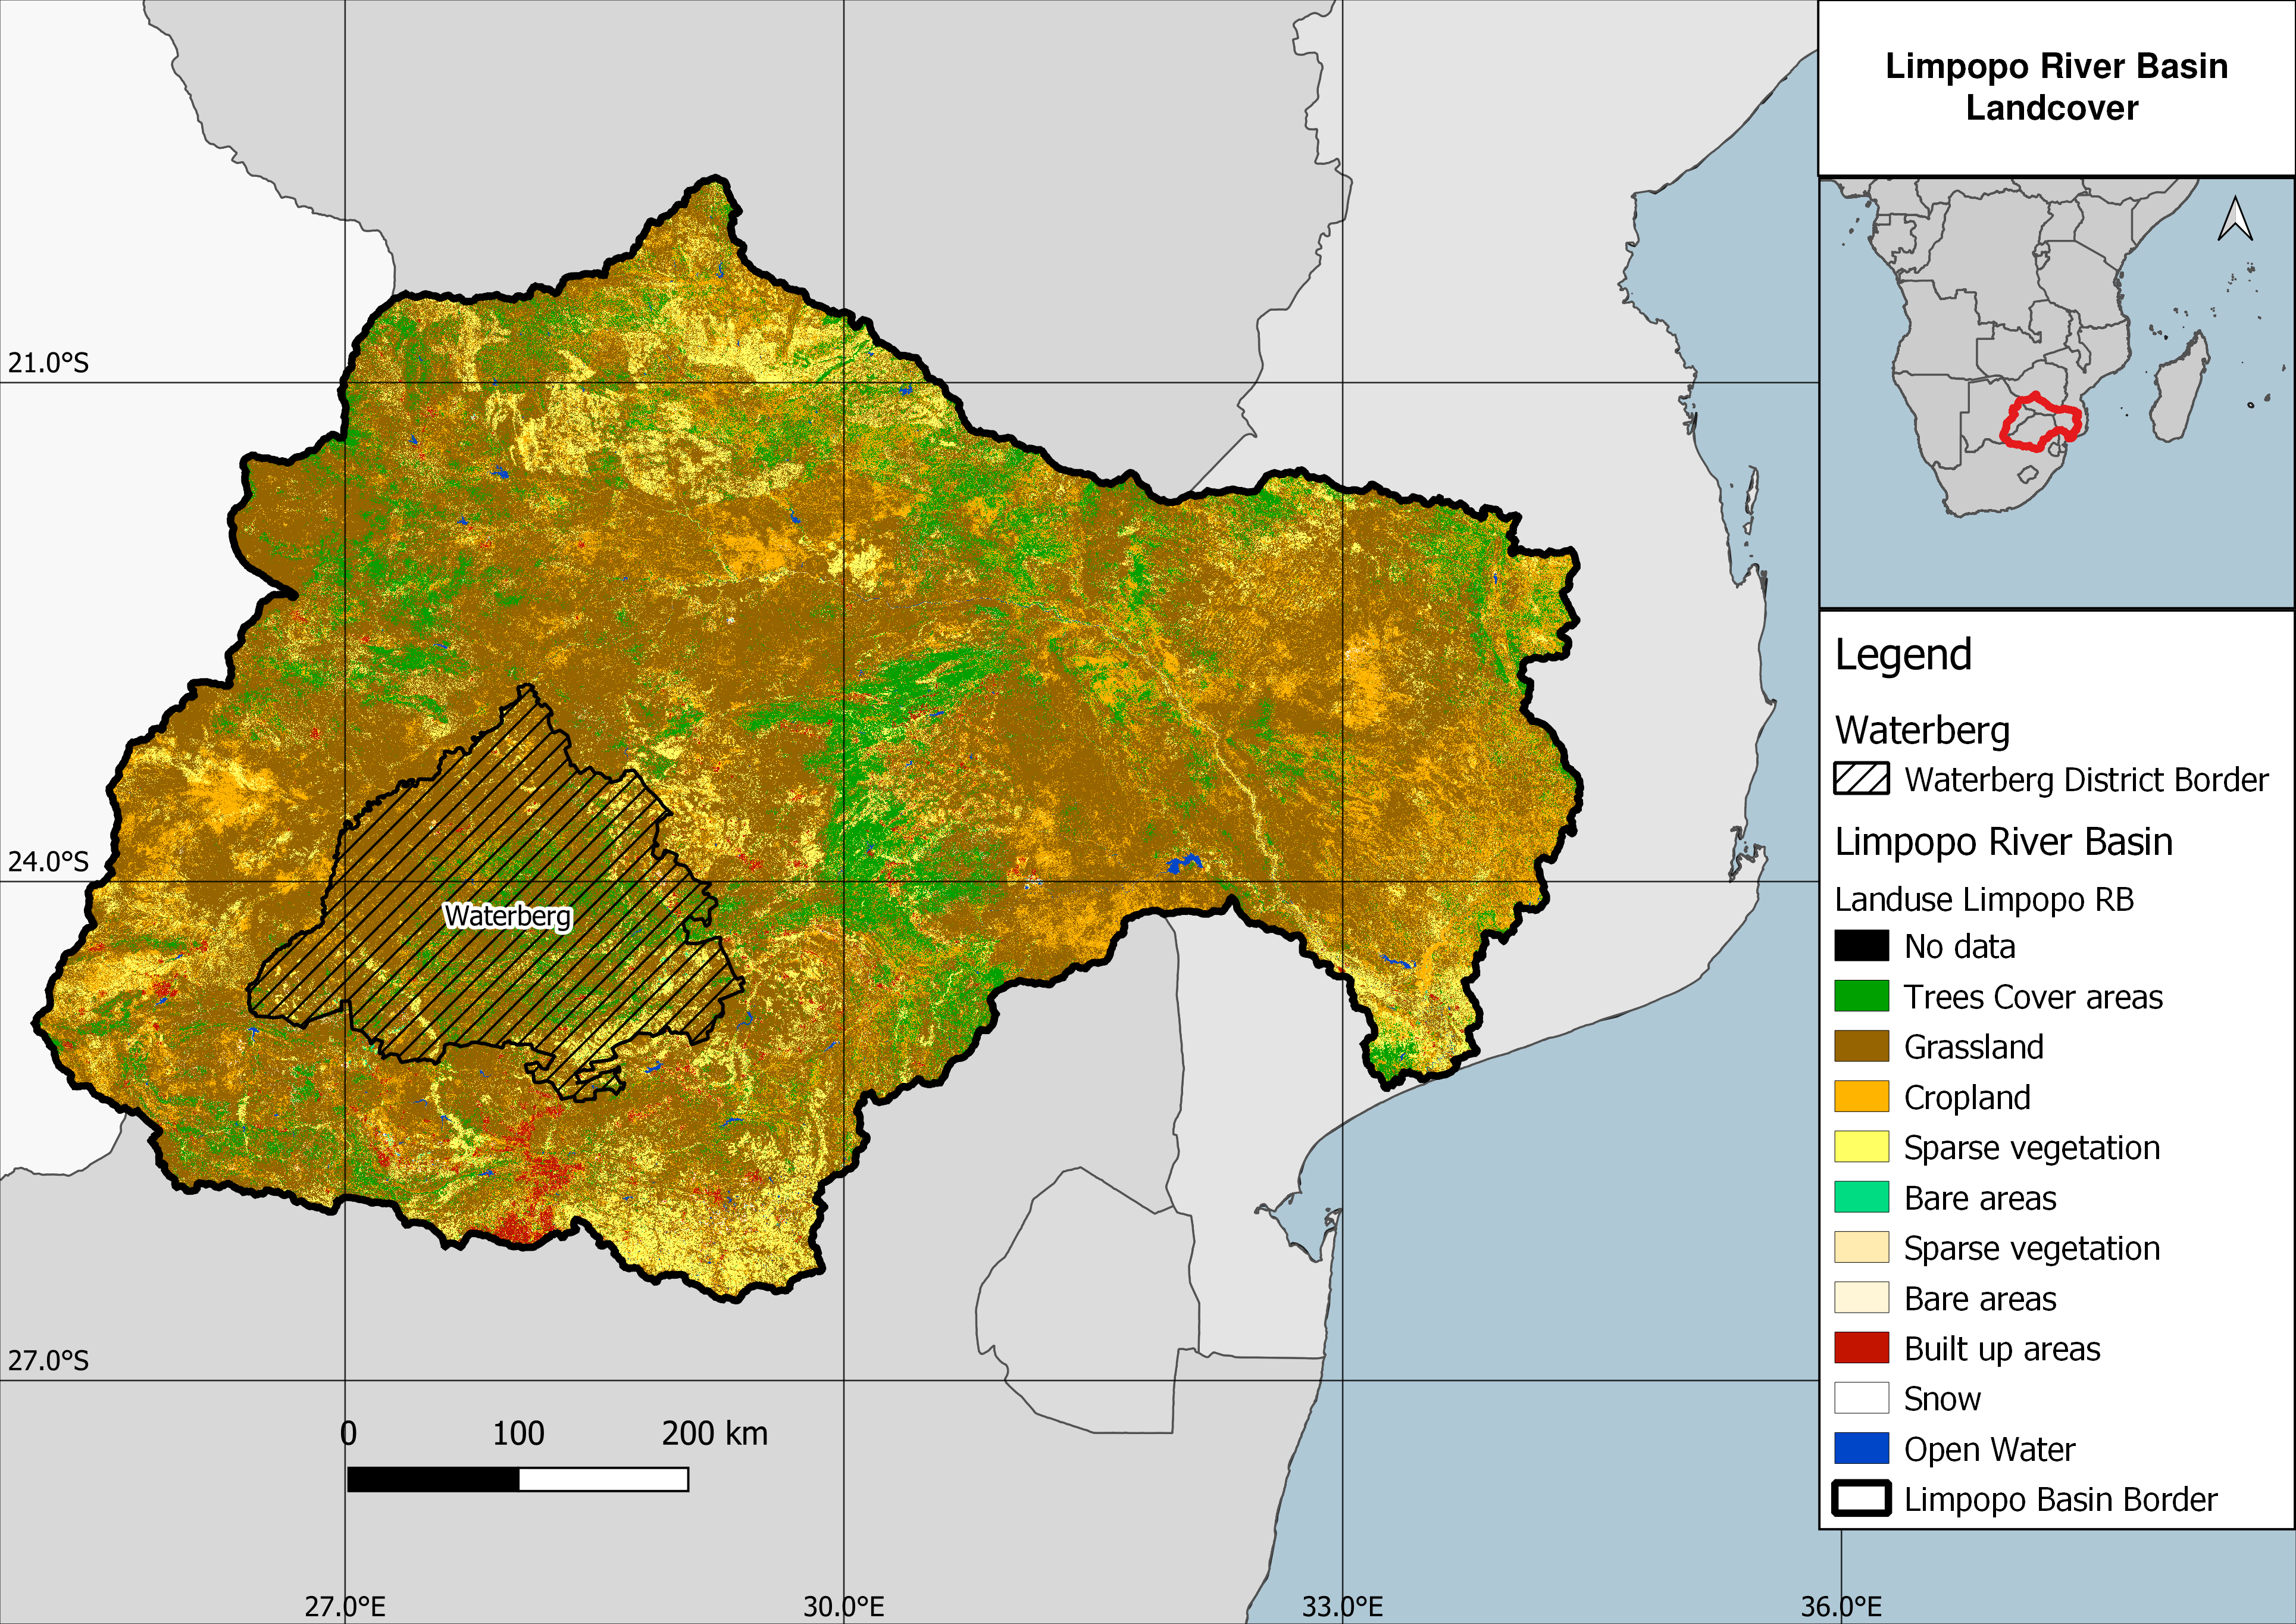 Landuse in the Waterberg District and the Limpopo River Basin